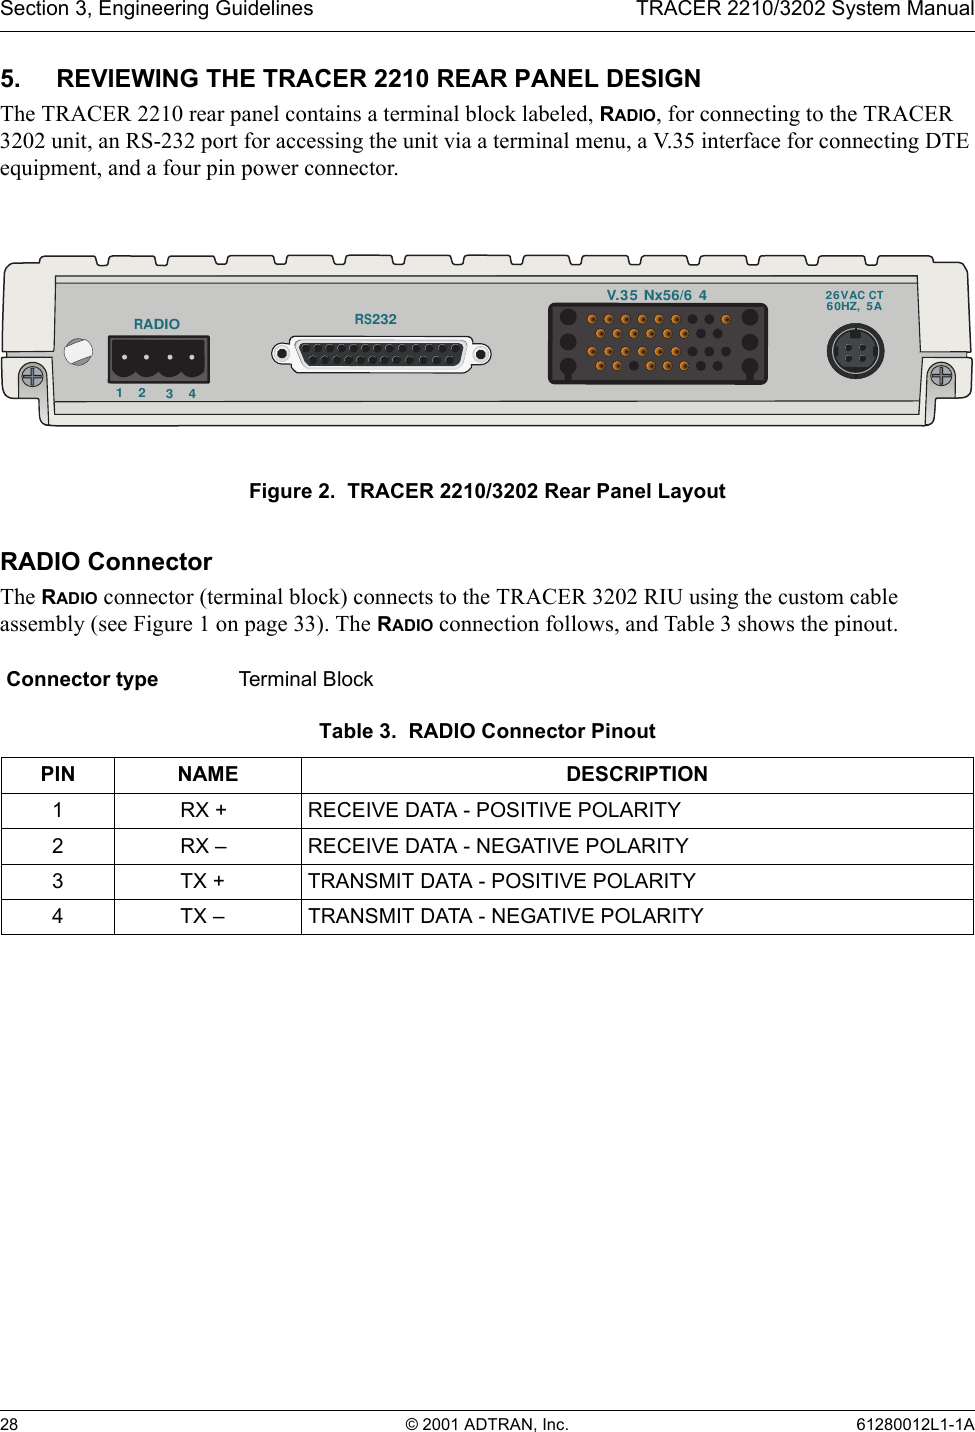 Section 3, Engineering Guidelines TRACER 2210/3202 System Manual28 © 2001 ADTRAN, Inc. 61280012L1-1A5. REVIEWING THE TRACER 2210 REAR PANEL DESIGNThe TRACER 2210 rear panel contains a terminal block labeled, RADIO, for connecting to the TRACER 3202 unit, an RS-232 port for accessing the unit via a terminal menu, a V.35 interface for connecting DTE equipment, and a four pin power connector.Figure 2.  TRACER 2210/3202 Rear Panel LayoutRADIO ConnectorThe RADIO connector (terminal block) connects to the TRACER 3202 RIU using the custom cable assembly (see Figure 1 on page 33). The RADIO connection follows, and Table 3 shows the pinout.Connector type Terminal BlockTable 3.  RADIO Connector PinoutPIN NAME DESCRIPTION1 RX + RECEIVE DATA - POSITIVE POLARITY2 RX – RECEIVE DATA - NEGATIVE POLARITY3 TX + TRANSMIT DATA - POSITIVE POLARITY4 TX – TRANSMIT DATA - NEGATIVE POLARITY1    2     3    4RADIORS232V.35 Nx56/6 426VAC CT60HZ,  5A